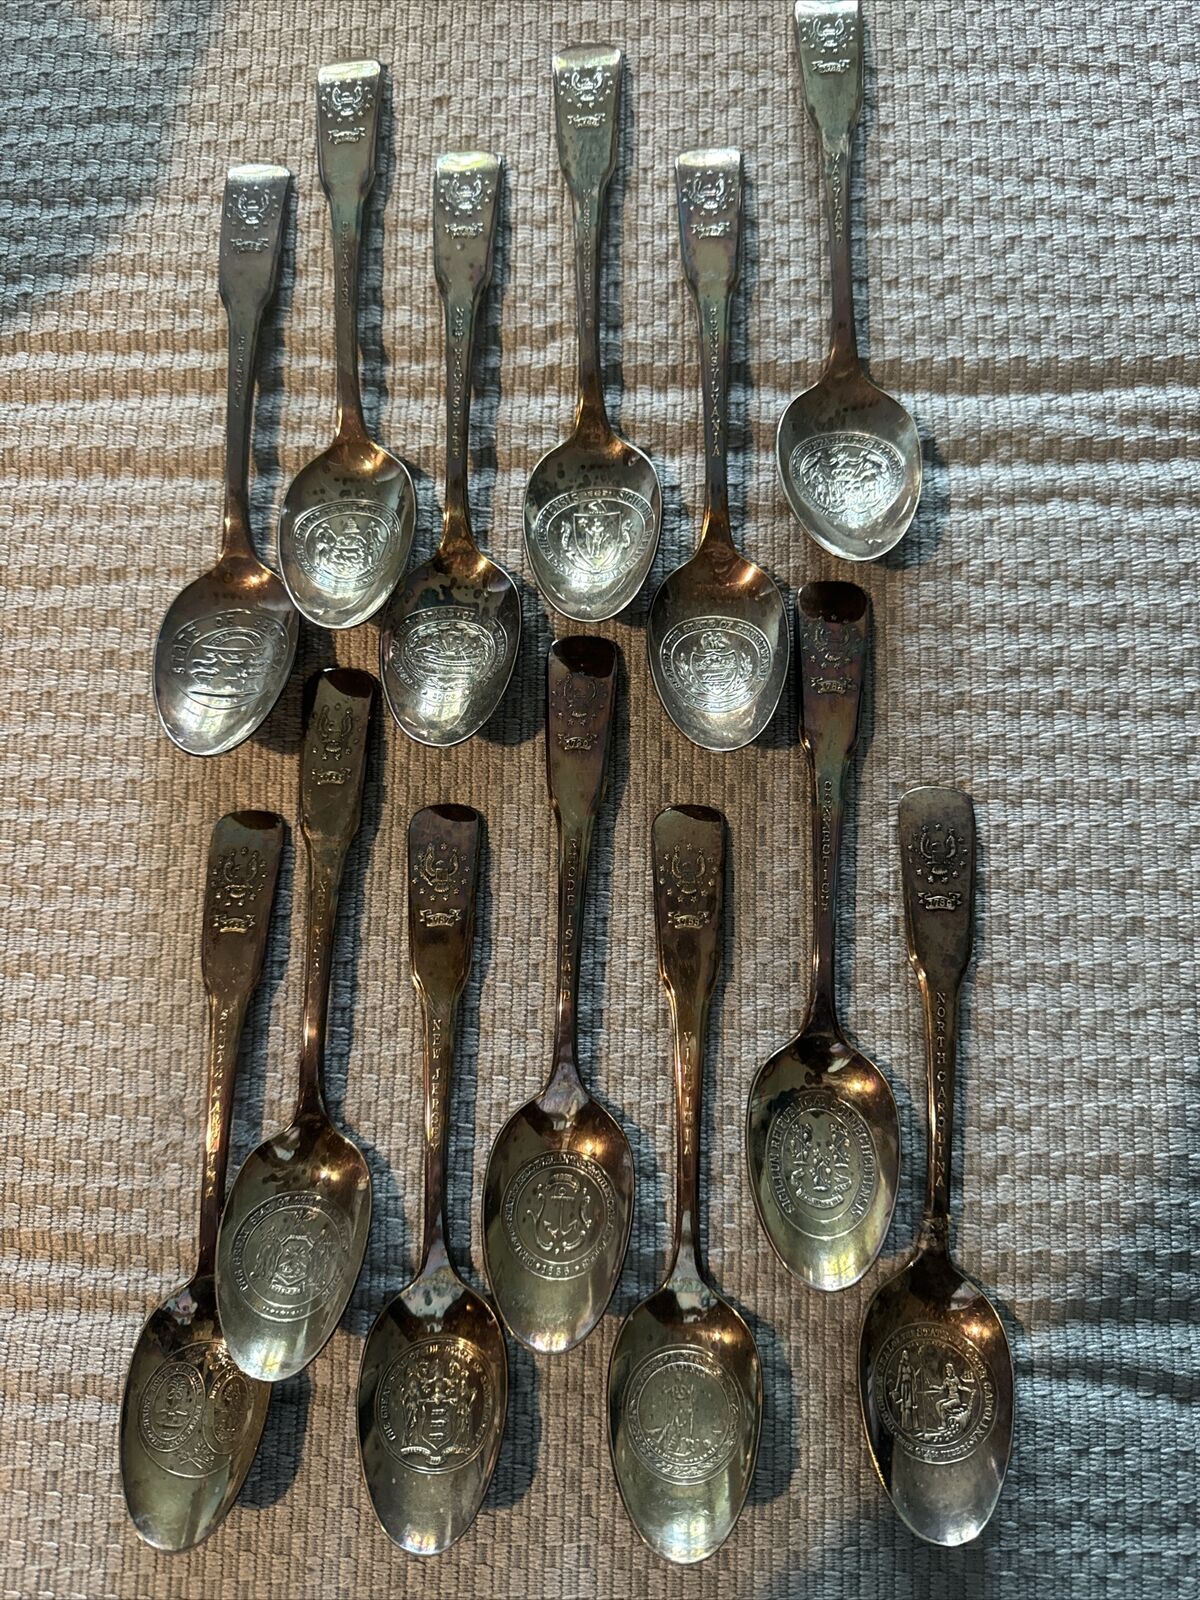 Antique Silverware LOT OF 13 Vintage STATE Original Colony Spoons